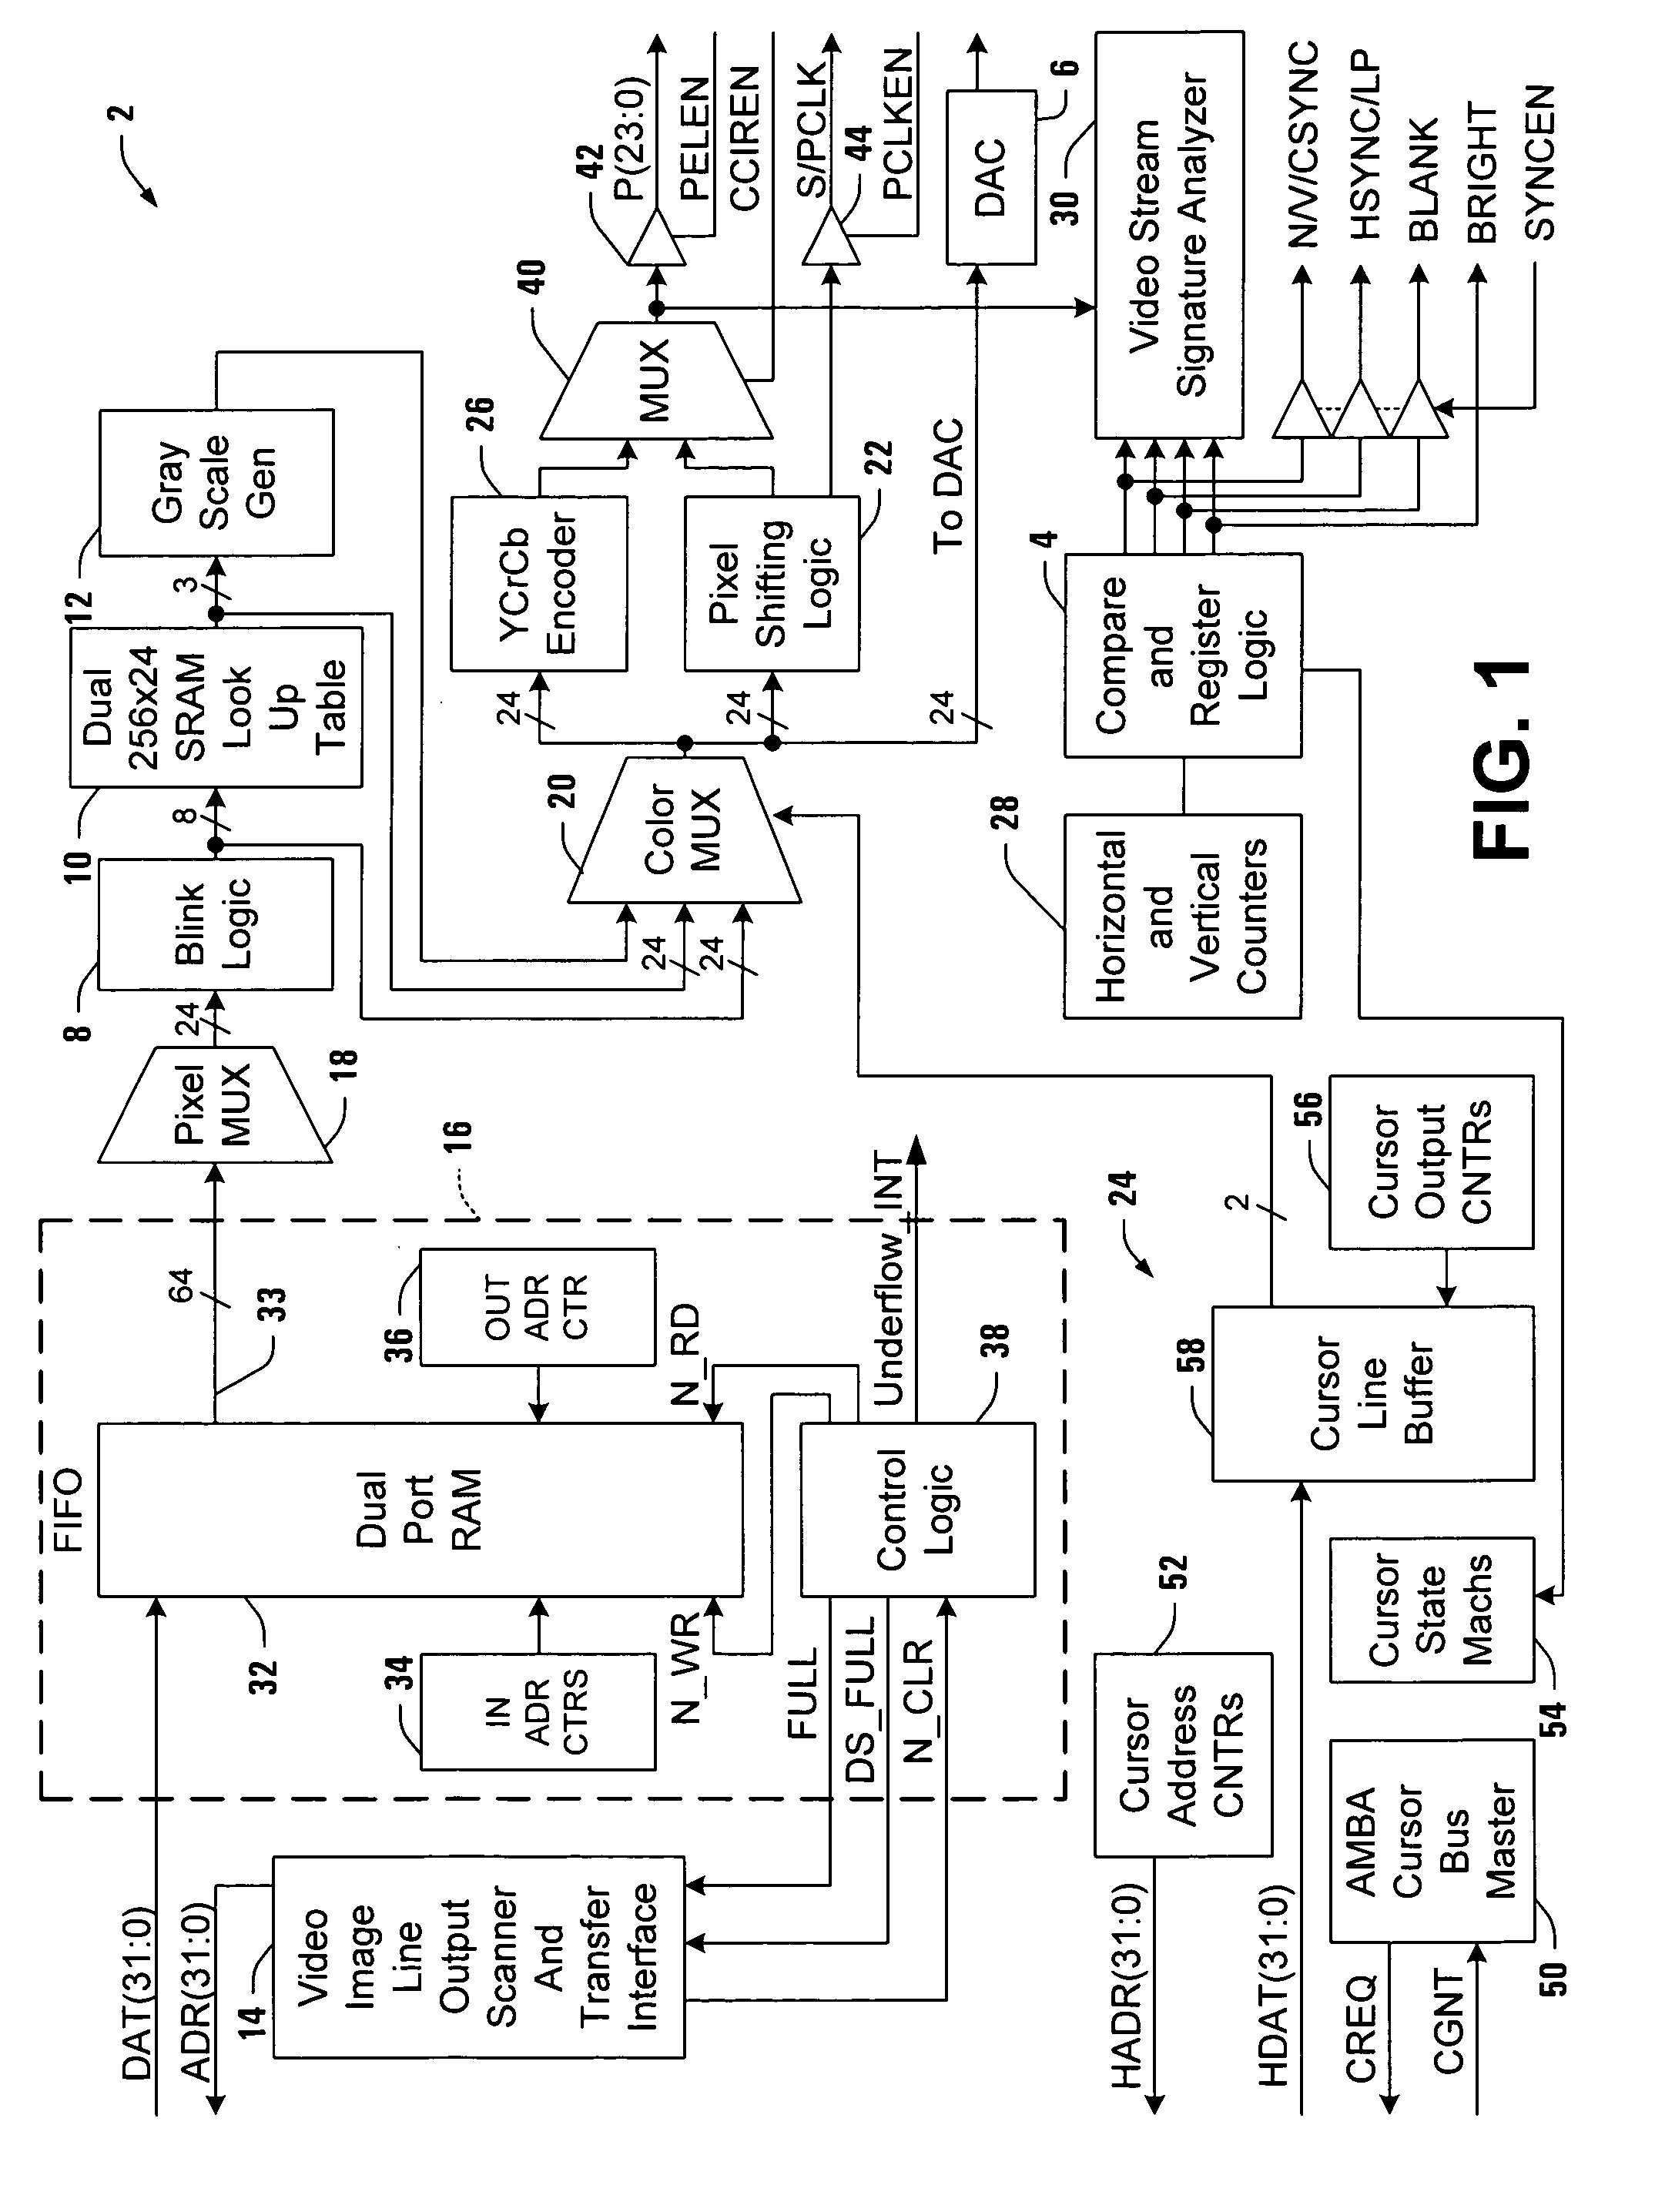 Raster engine with programmable hardware blinking